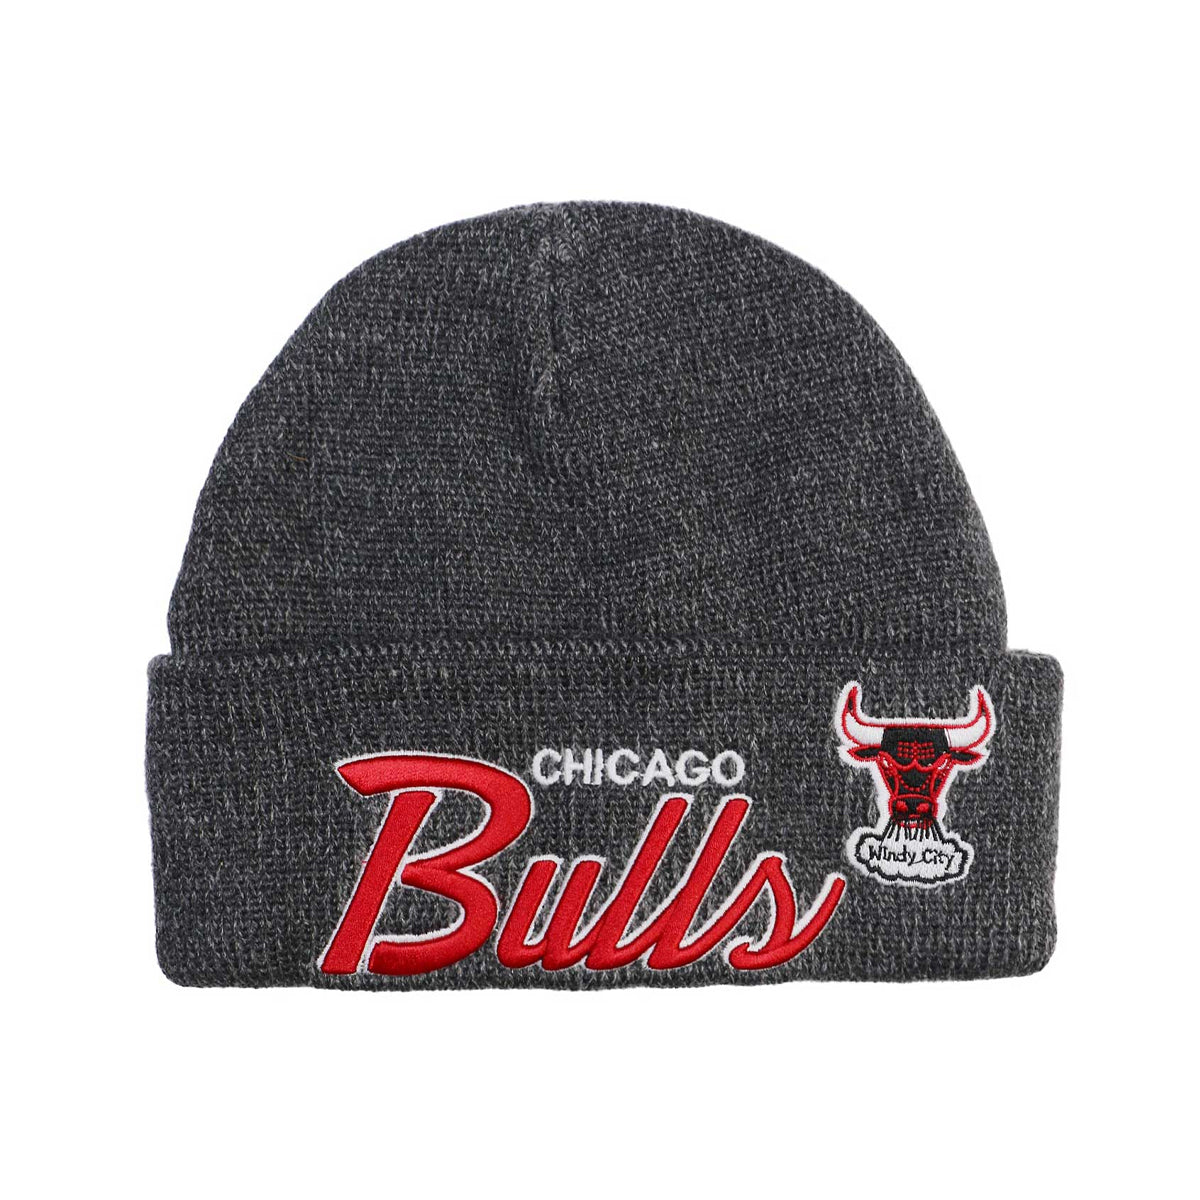 Chicago Bulls Gray Draft Cuffed Knit Hat with Pom